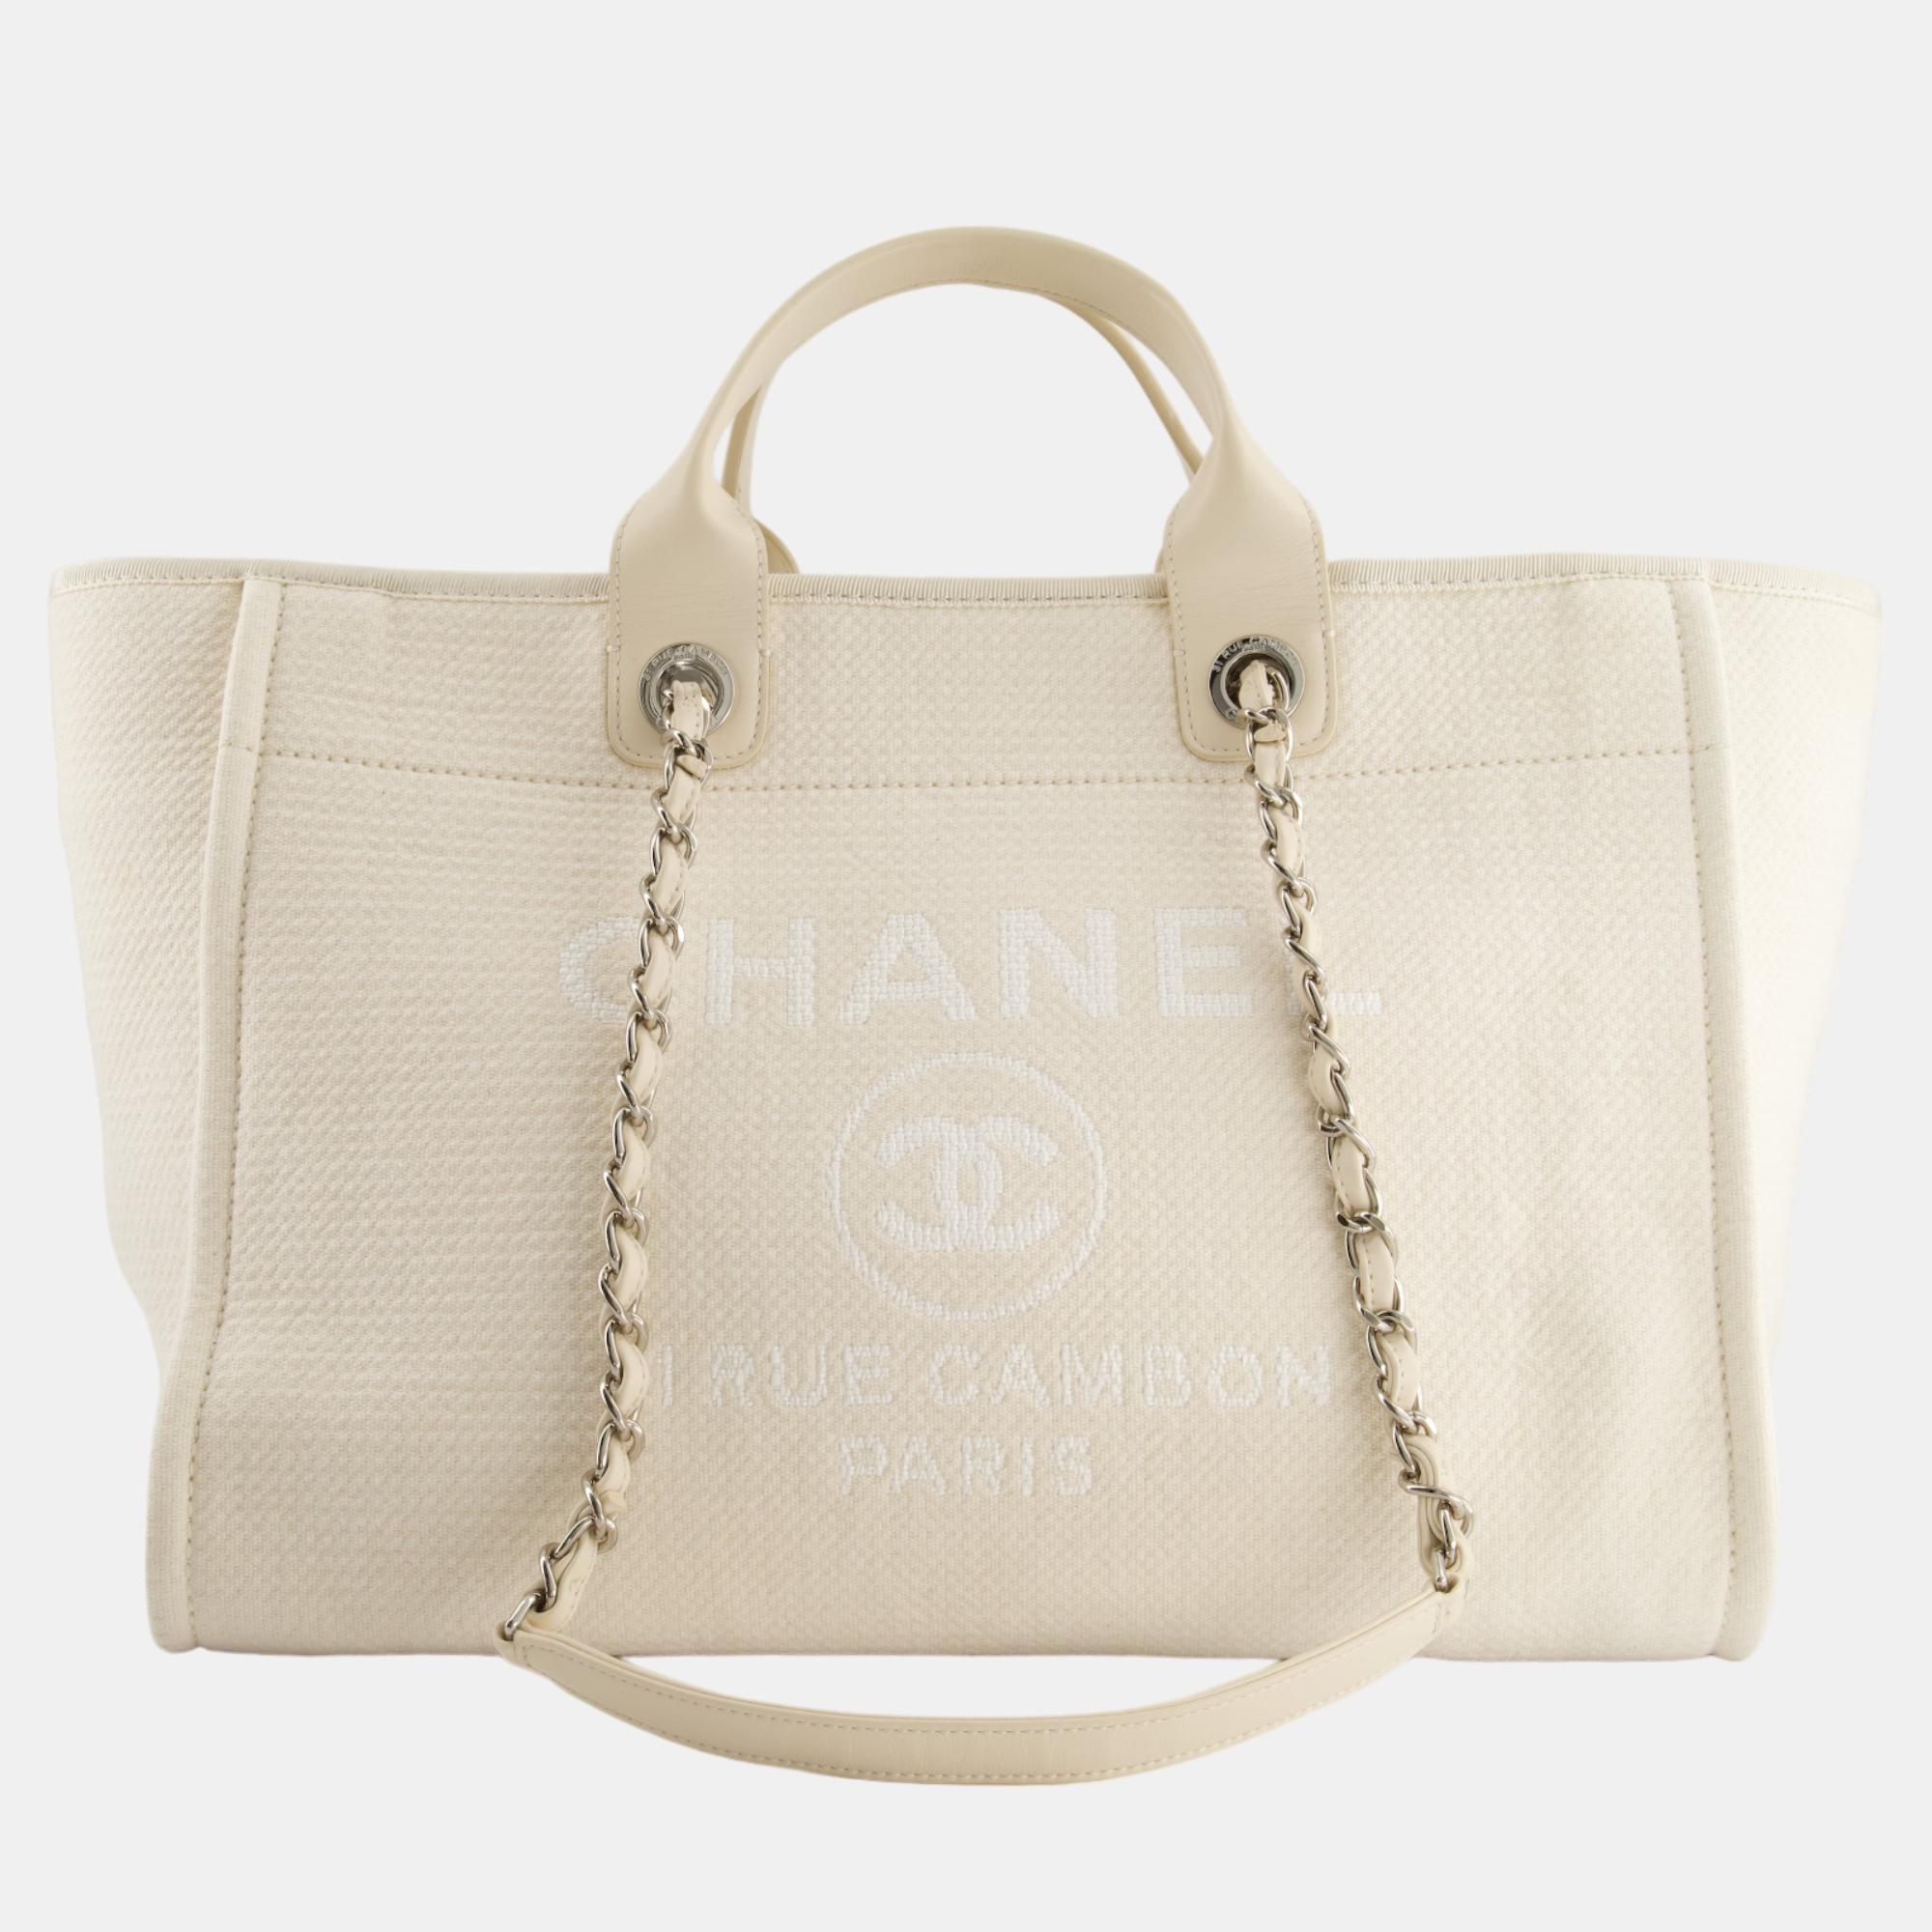 Chanel Large Cream Canvas Deauville Tote Bag With Silver Hardware